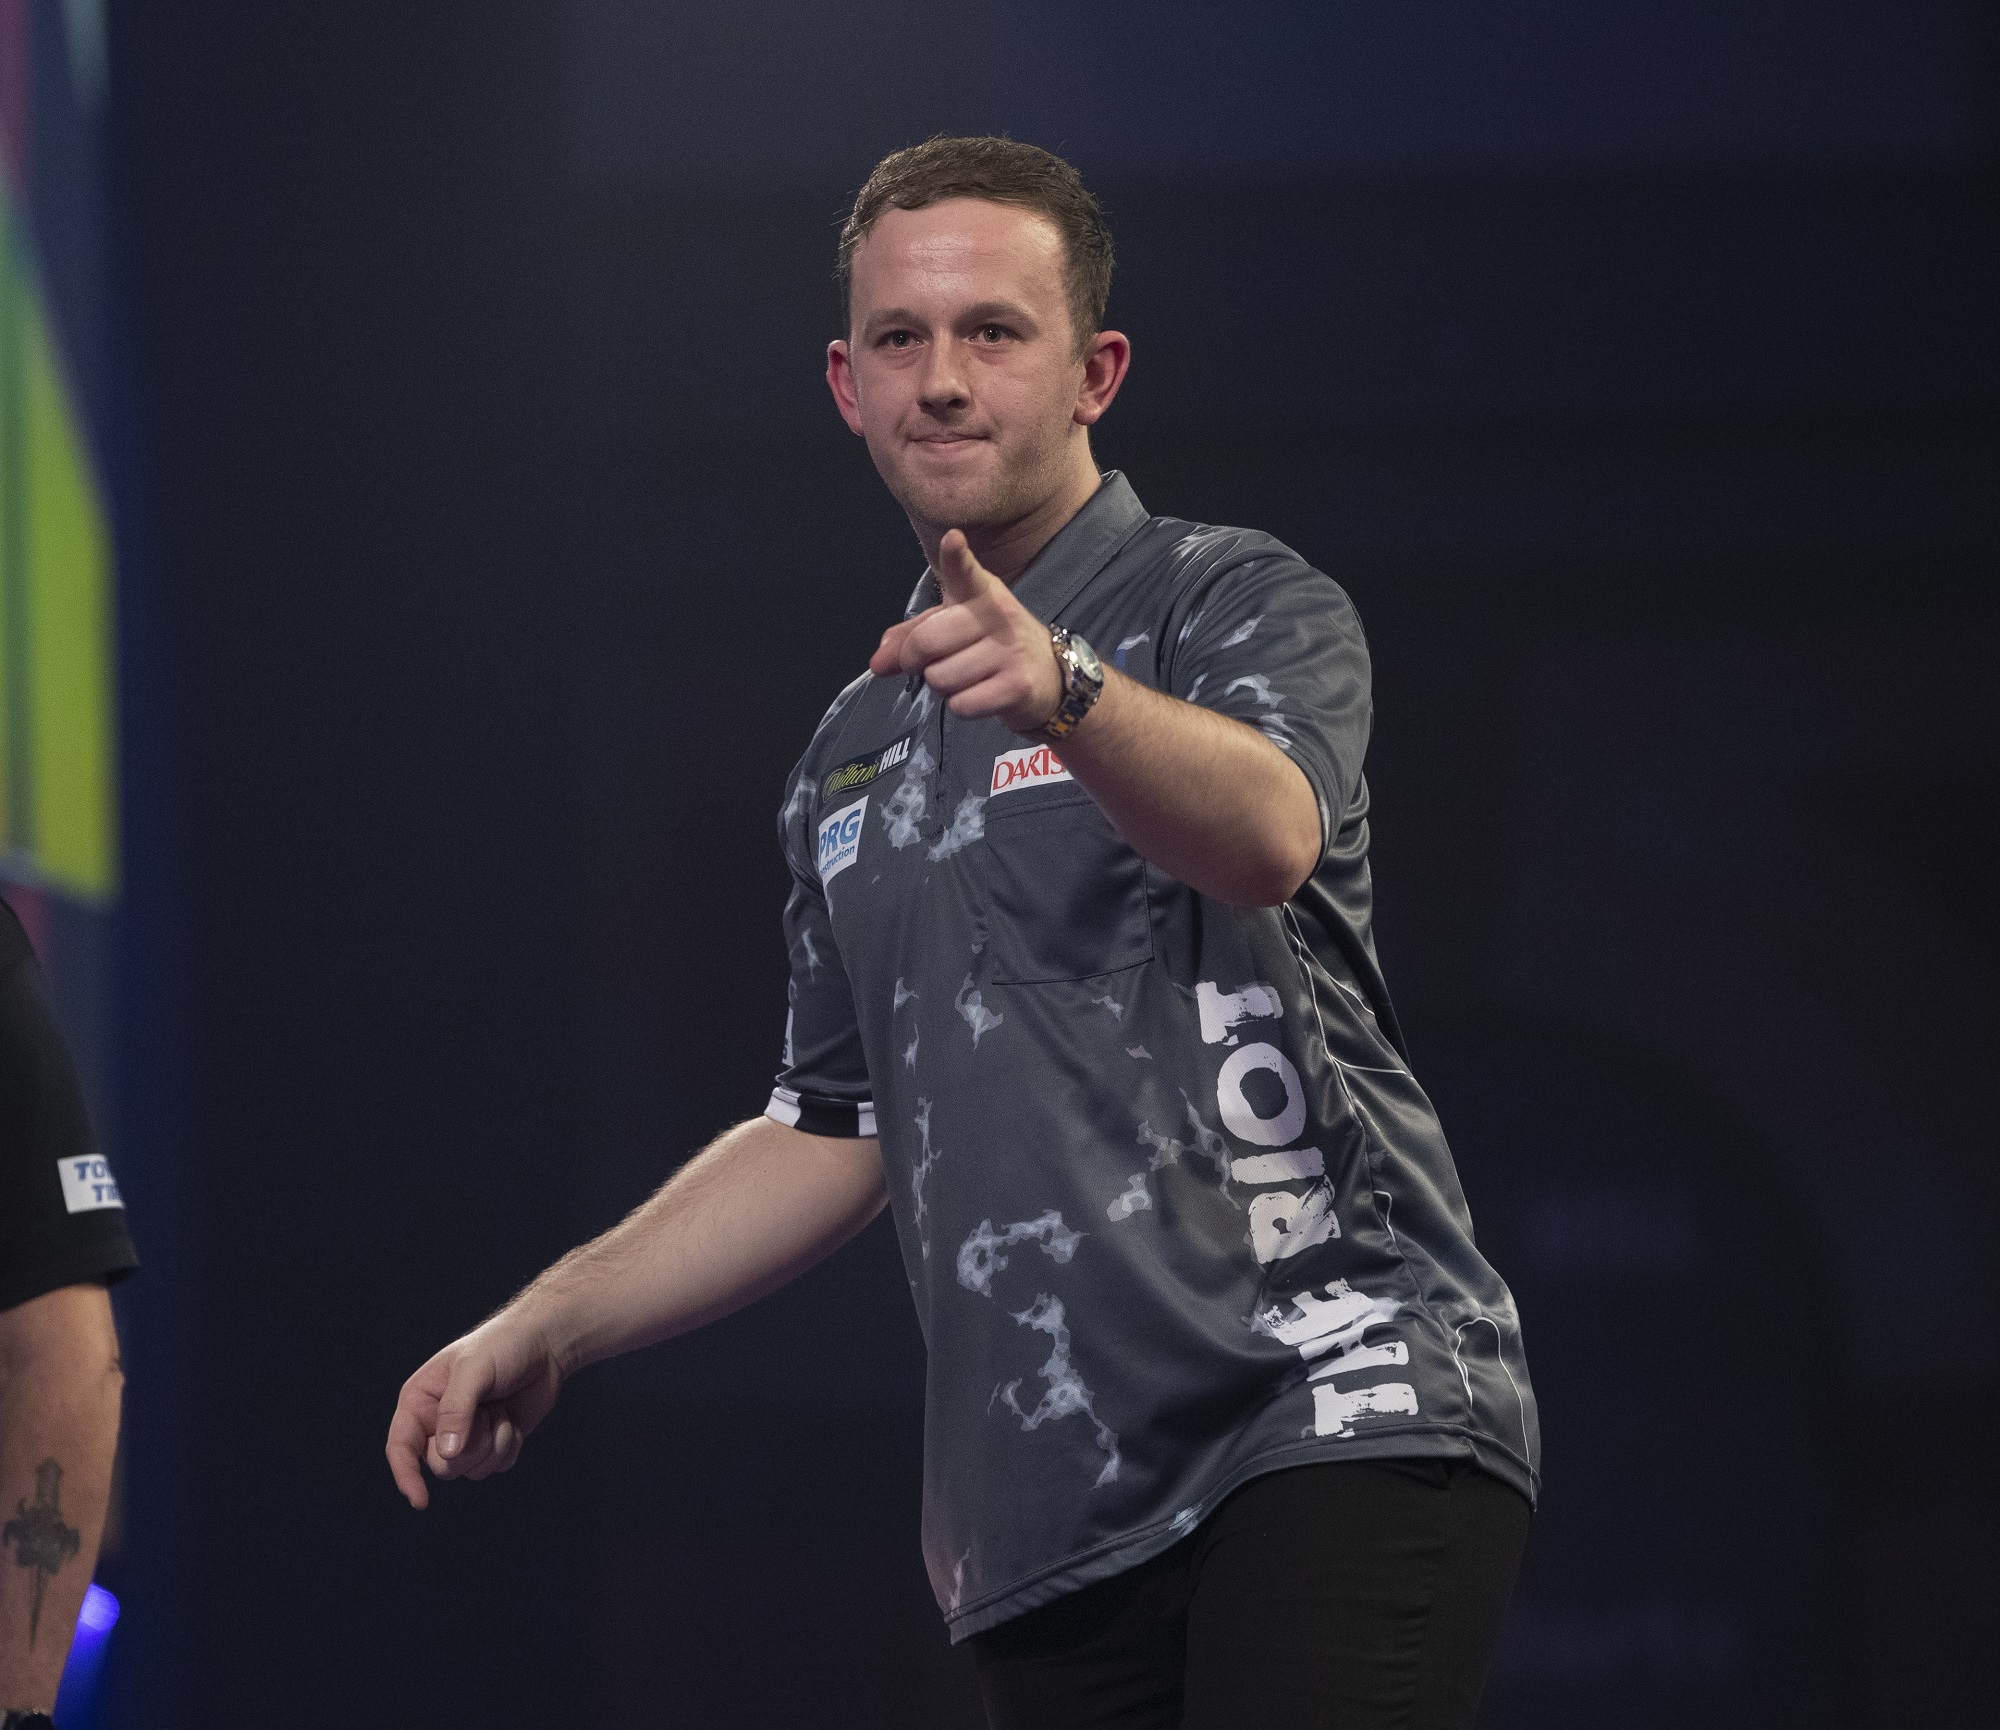 Rydz defeats Clayton to win day two of PDC Super Series